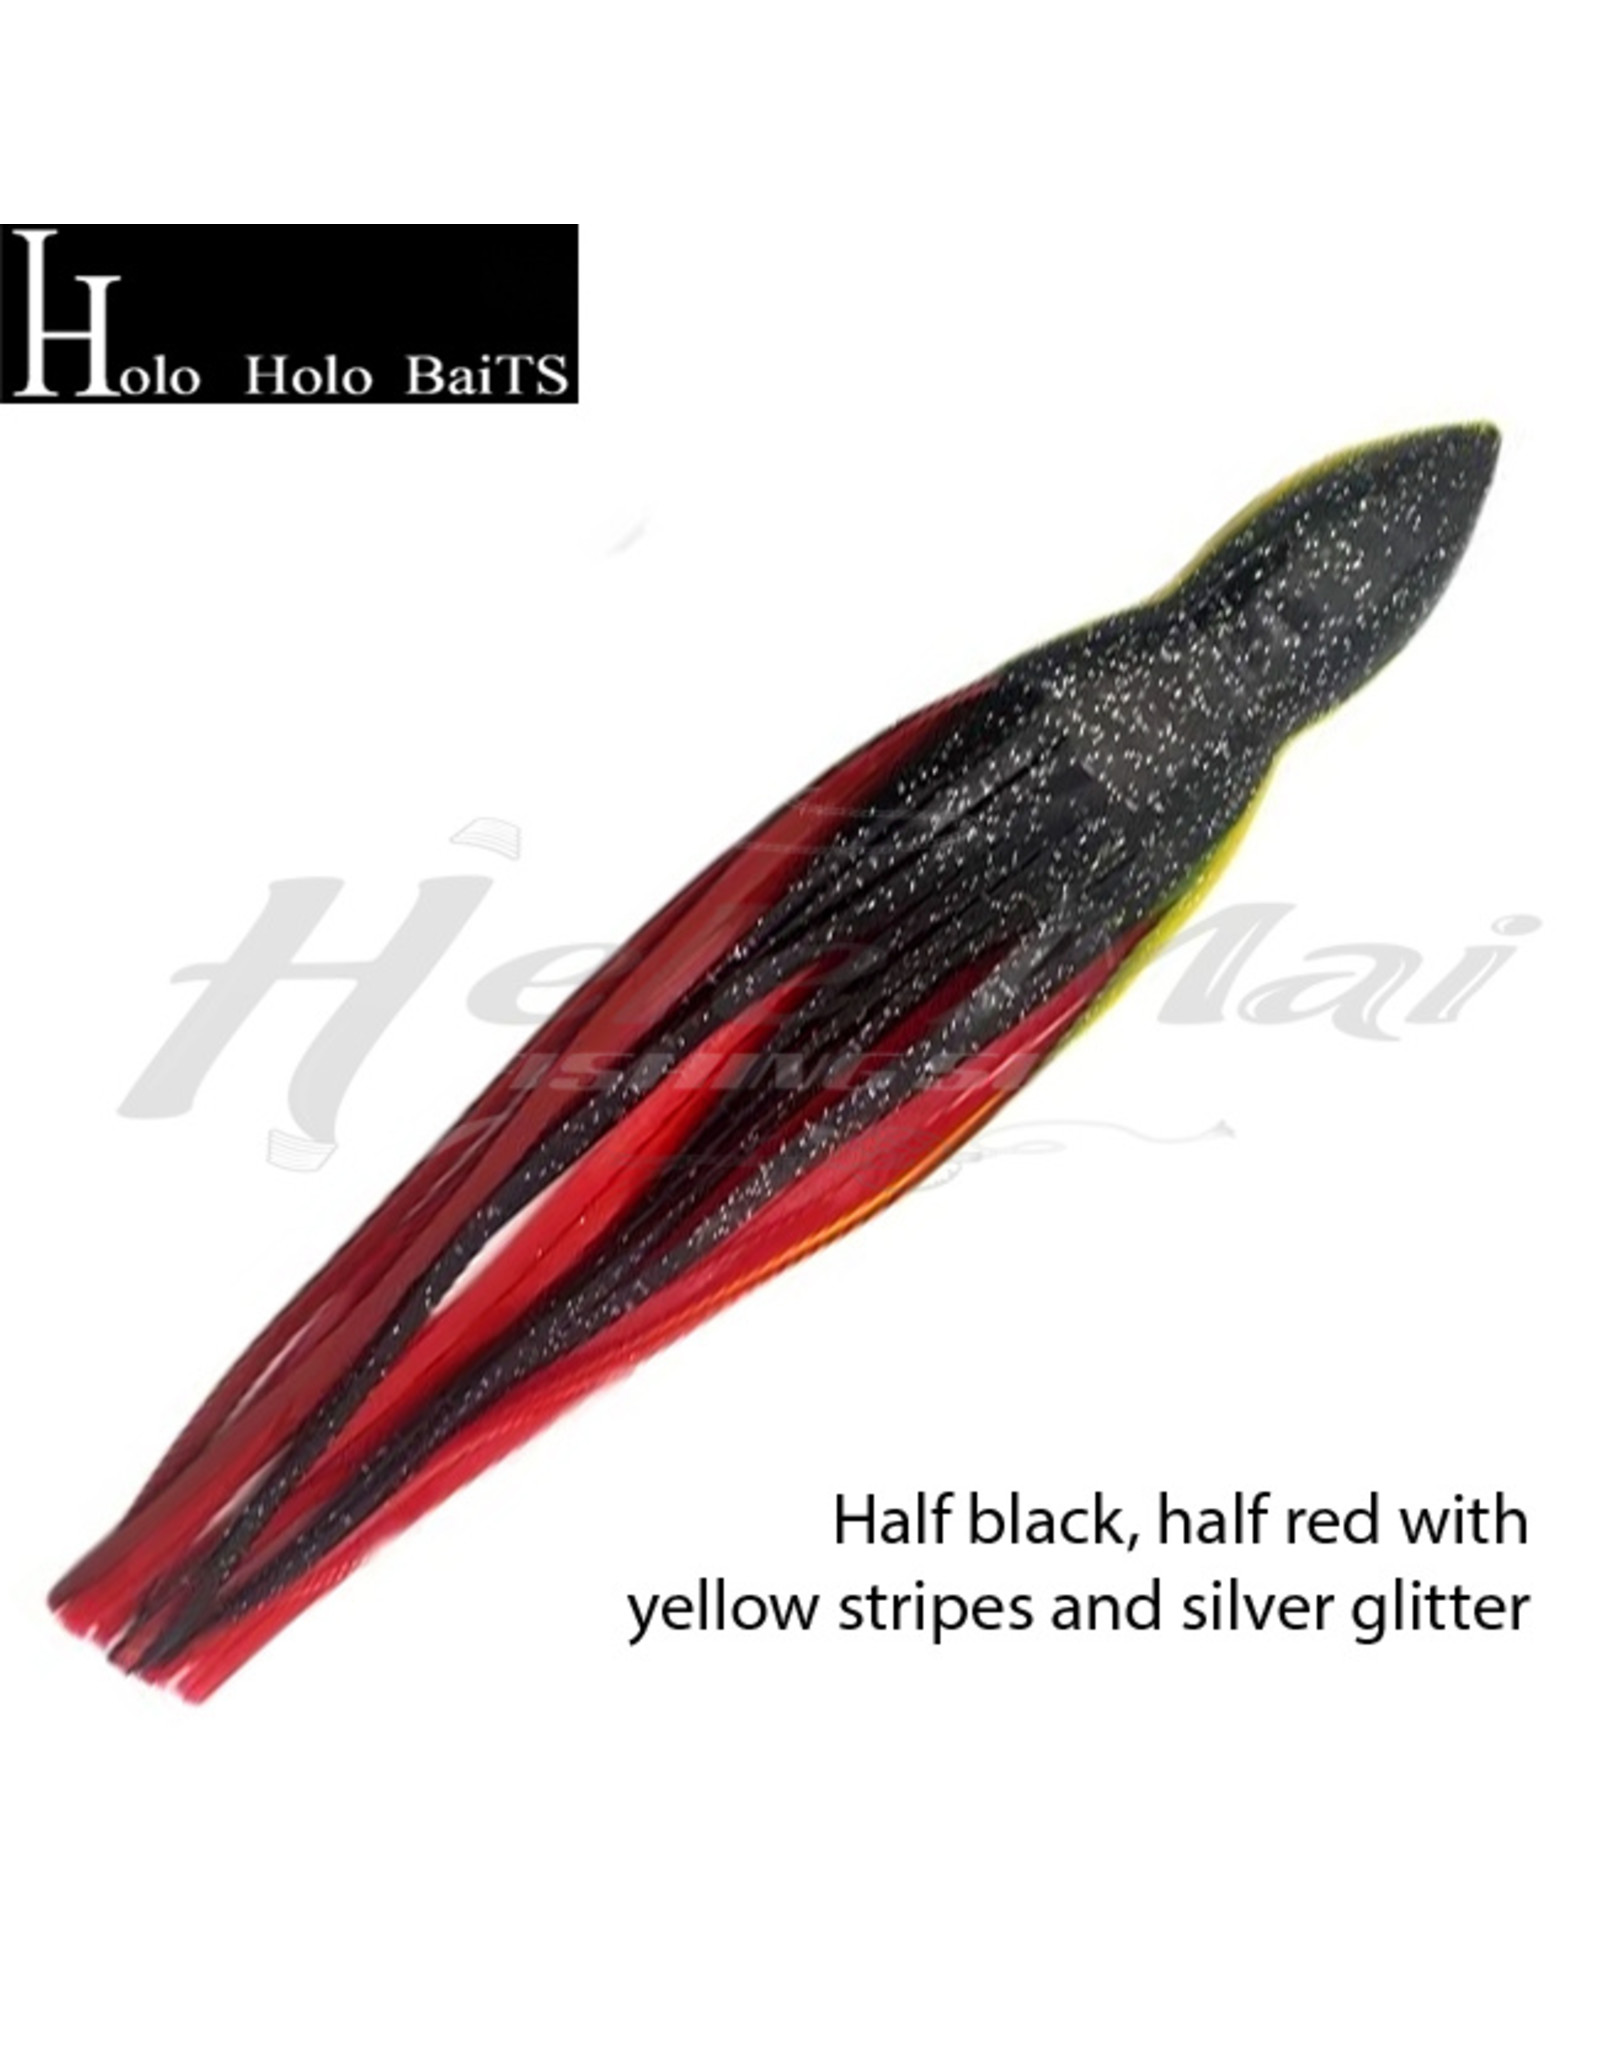 HOLO HOLO HAWAII (HHH) HH, 7" SQUID SKIRT BLACK RED GLITTER 0654